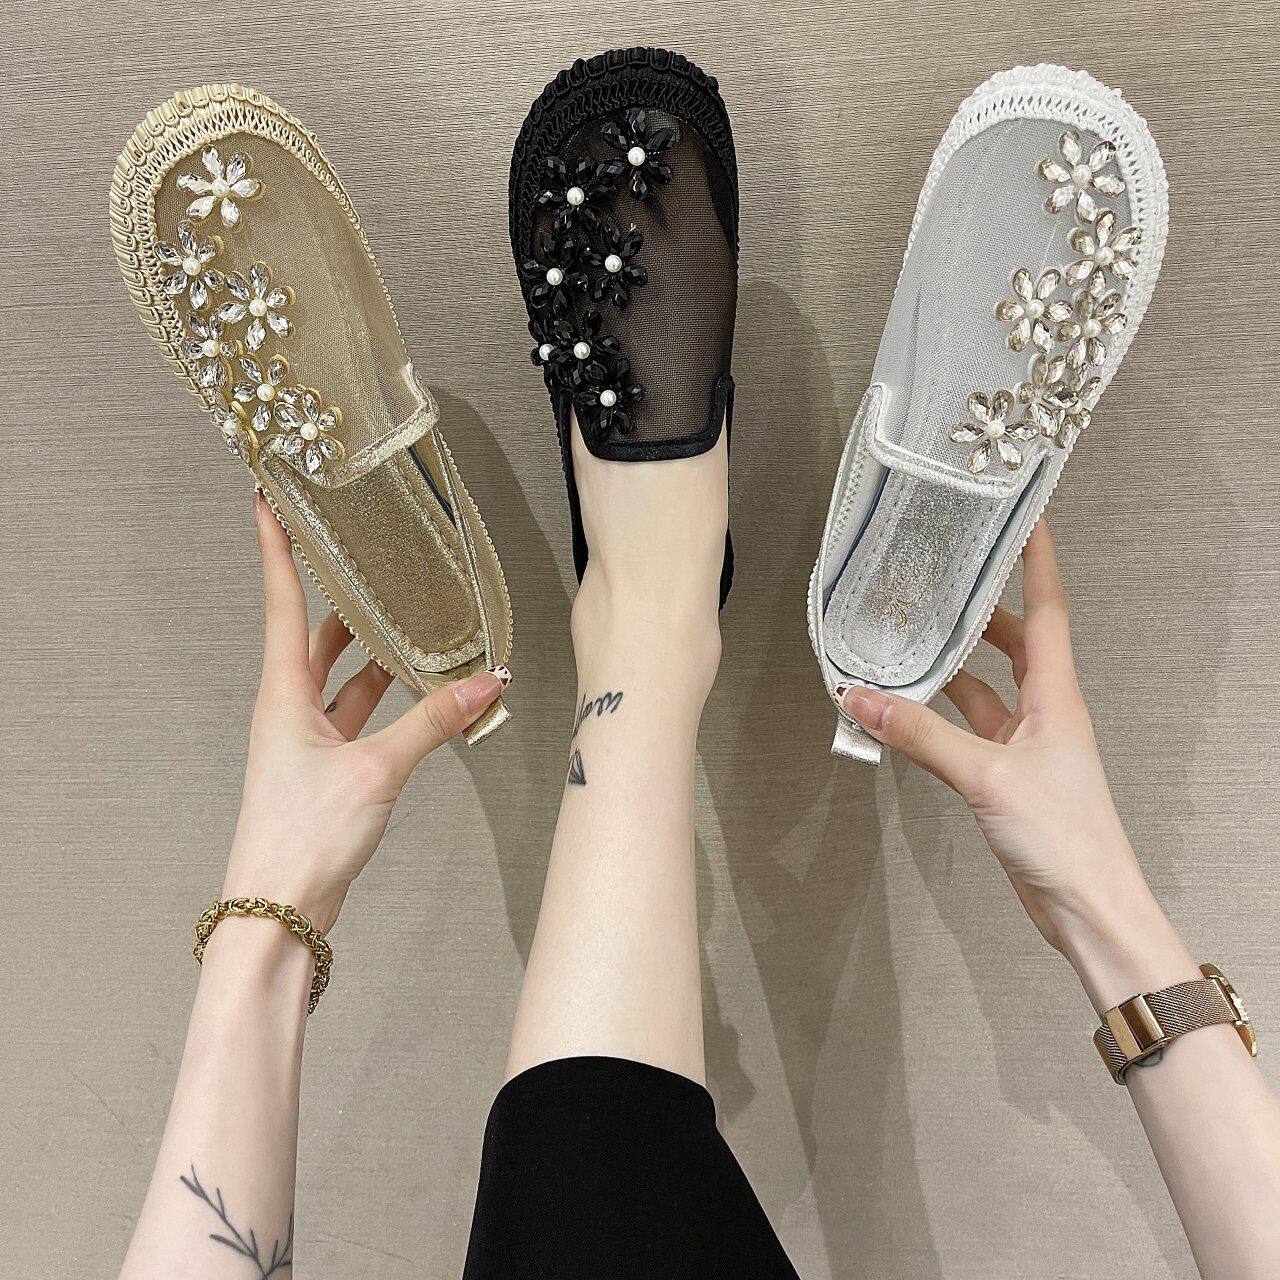 Glamorous - Ladies slippers for the girls who likes simple designs.. # slippers #shoes #fashion #sandals #fashionista #feet #style #memphisgirls  #footqueen #handmade #streetstyle #shoesaddic #accessories | Facebook